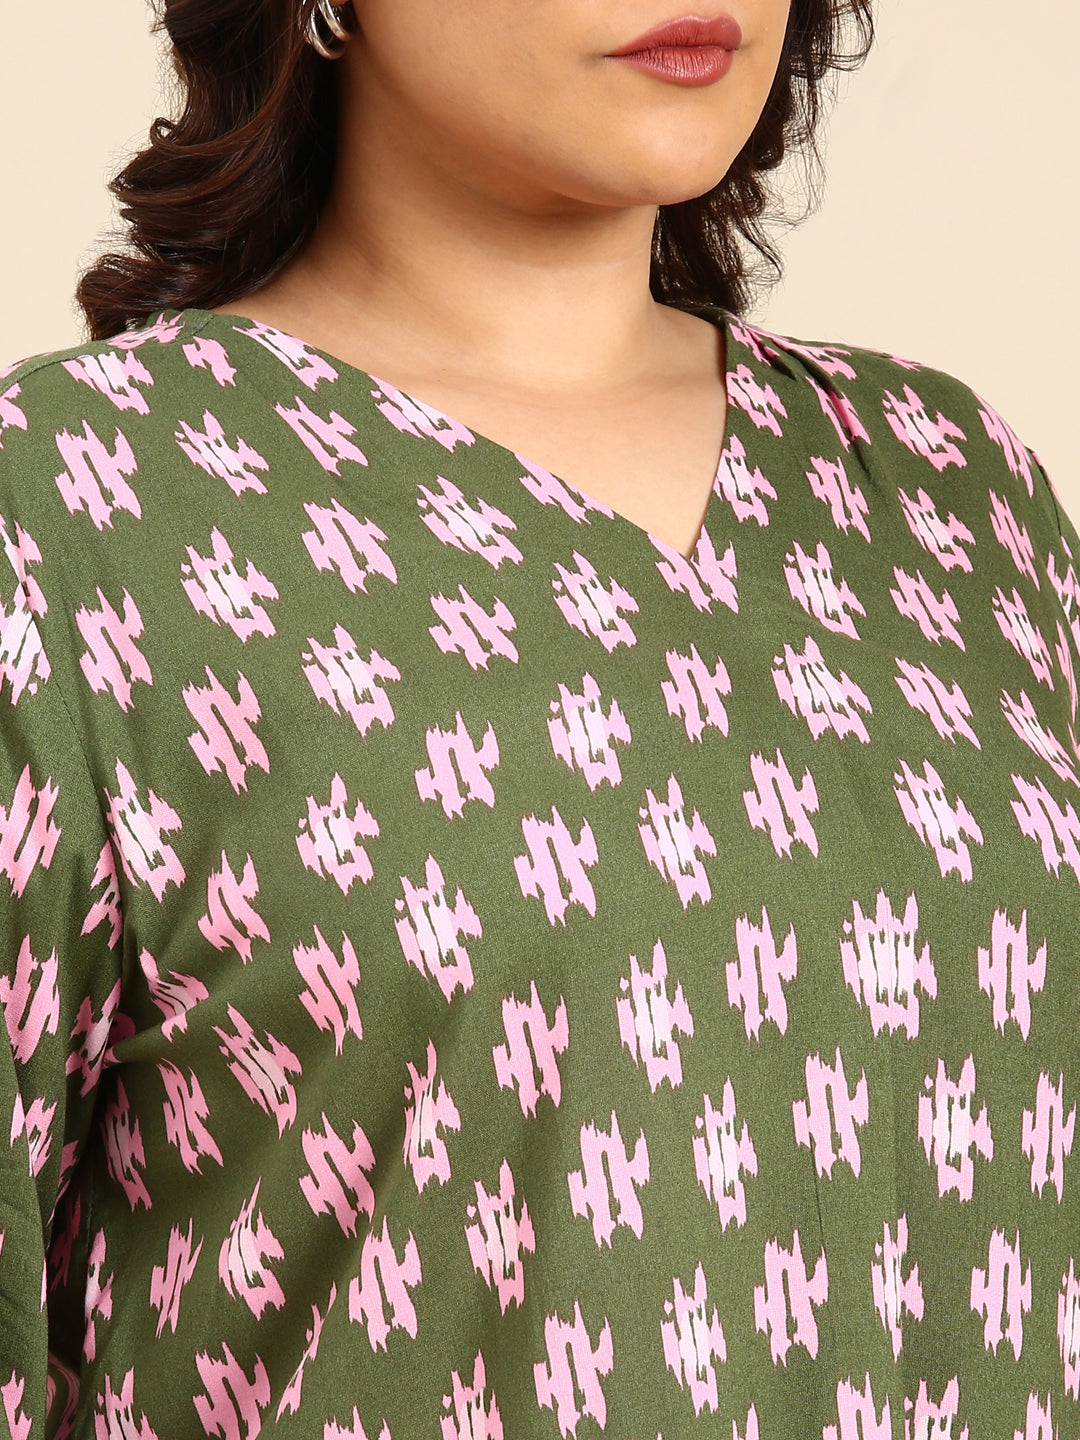 GREEN TOP WITH PINK IKAT PRINT